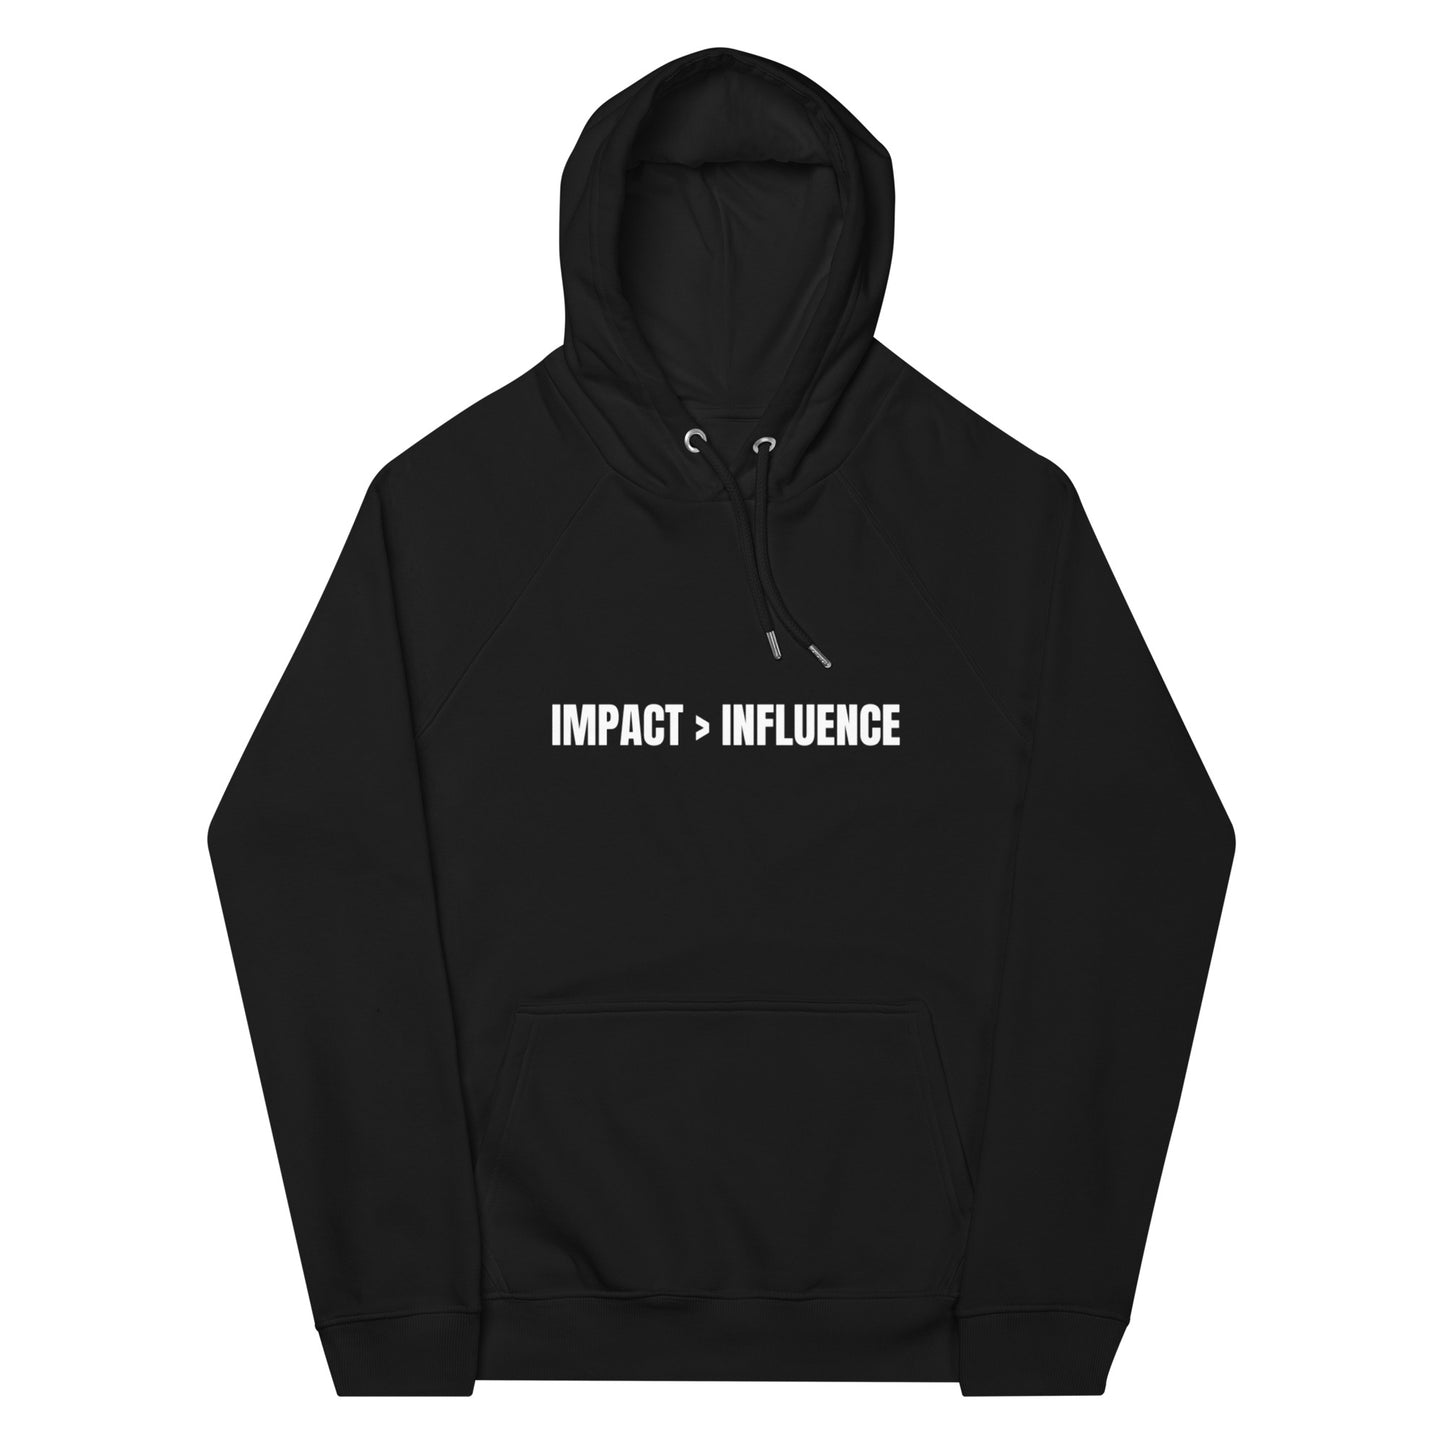 IMPACT > INFLUENCE Unisex (order a size larger than normal)